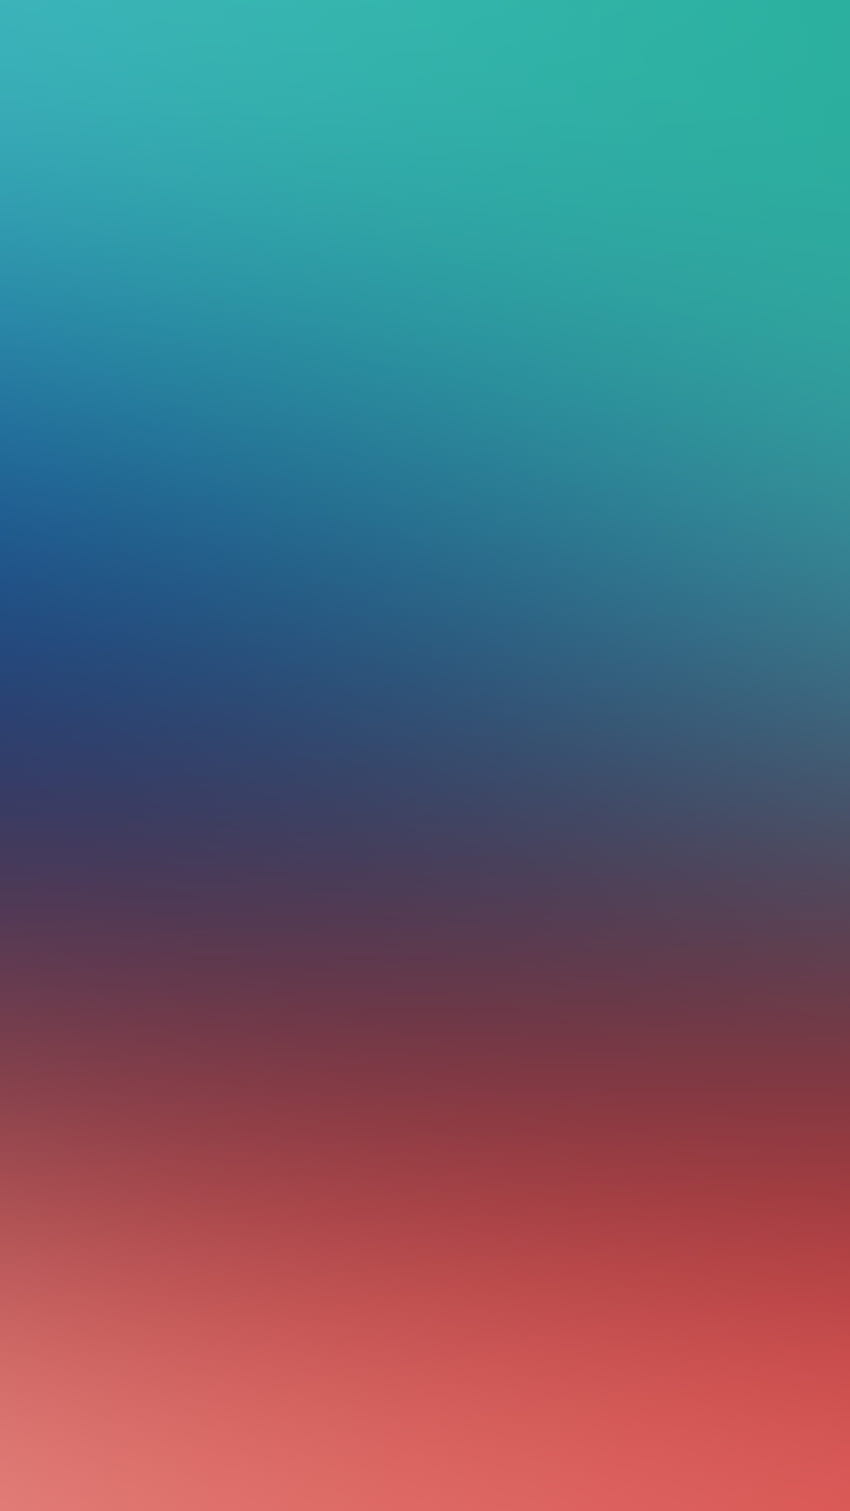 Seat under fire red blue gradation blur for iPhone 6, 6s, 7, 7s, 8, 8s, 10 HD phone wallpaper